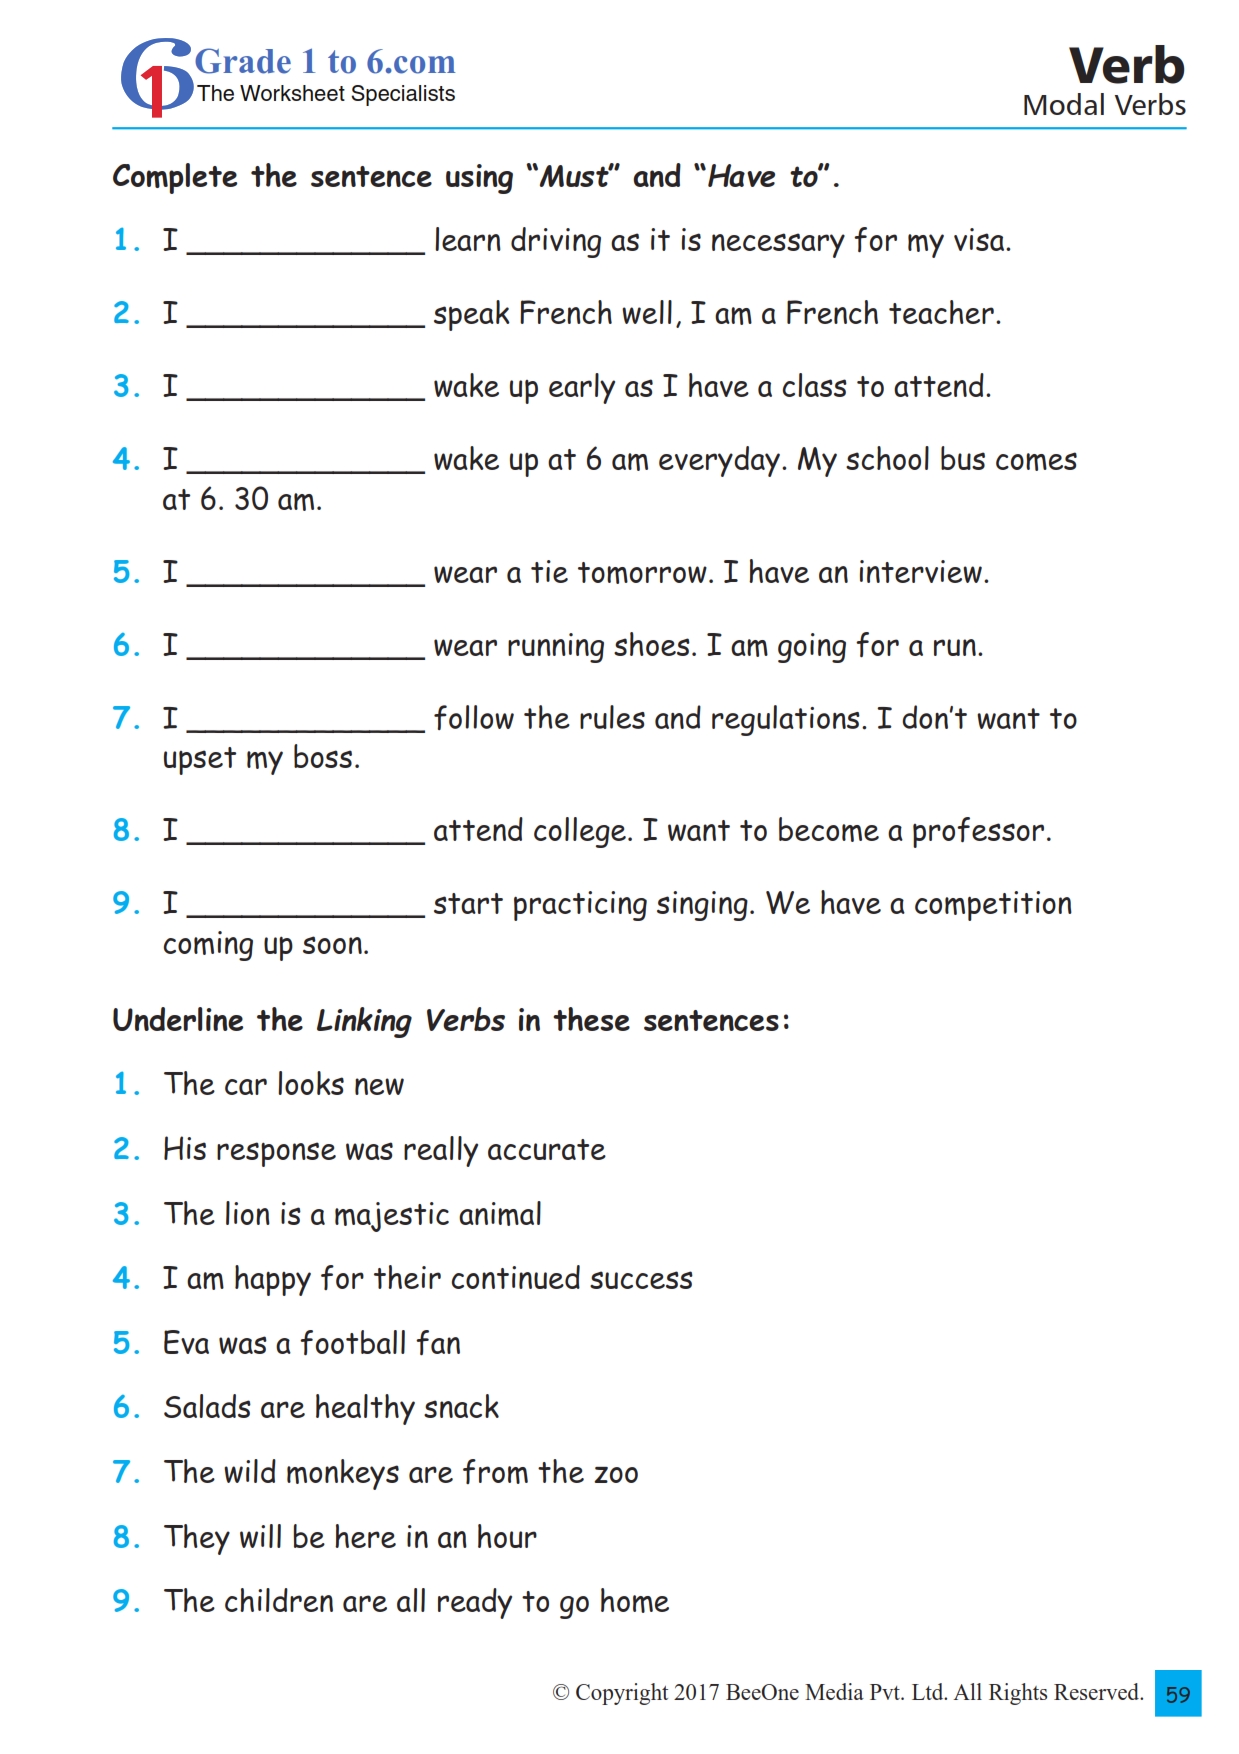 modal-verbs-exercises-and-worksheet-grade1to6